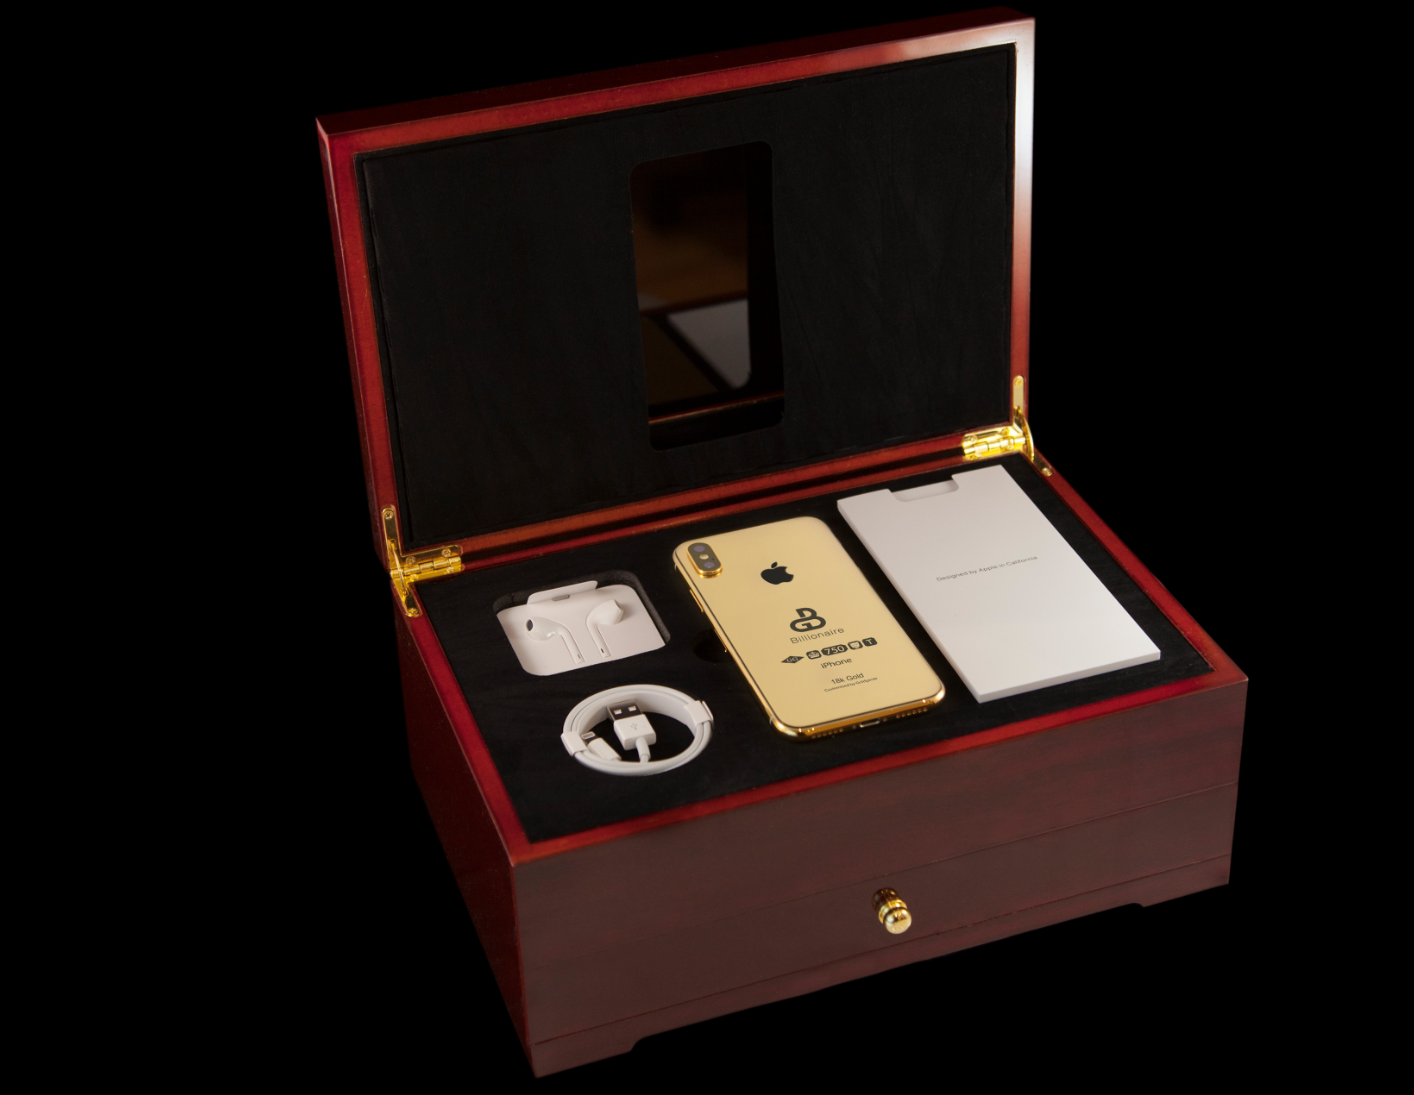 Get Your Gold-Plated 2018 'iPhone Xs' for Just $127,000